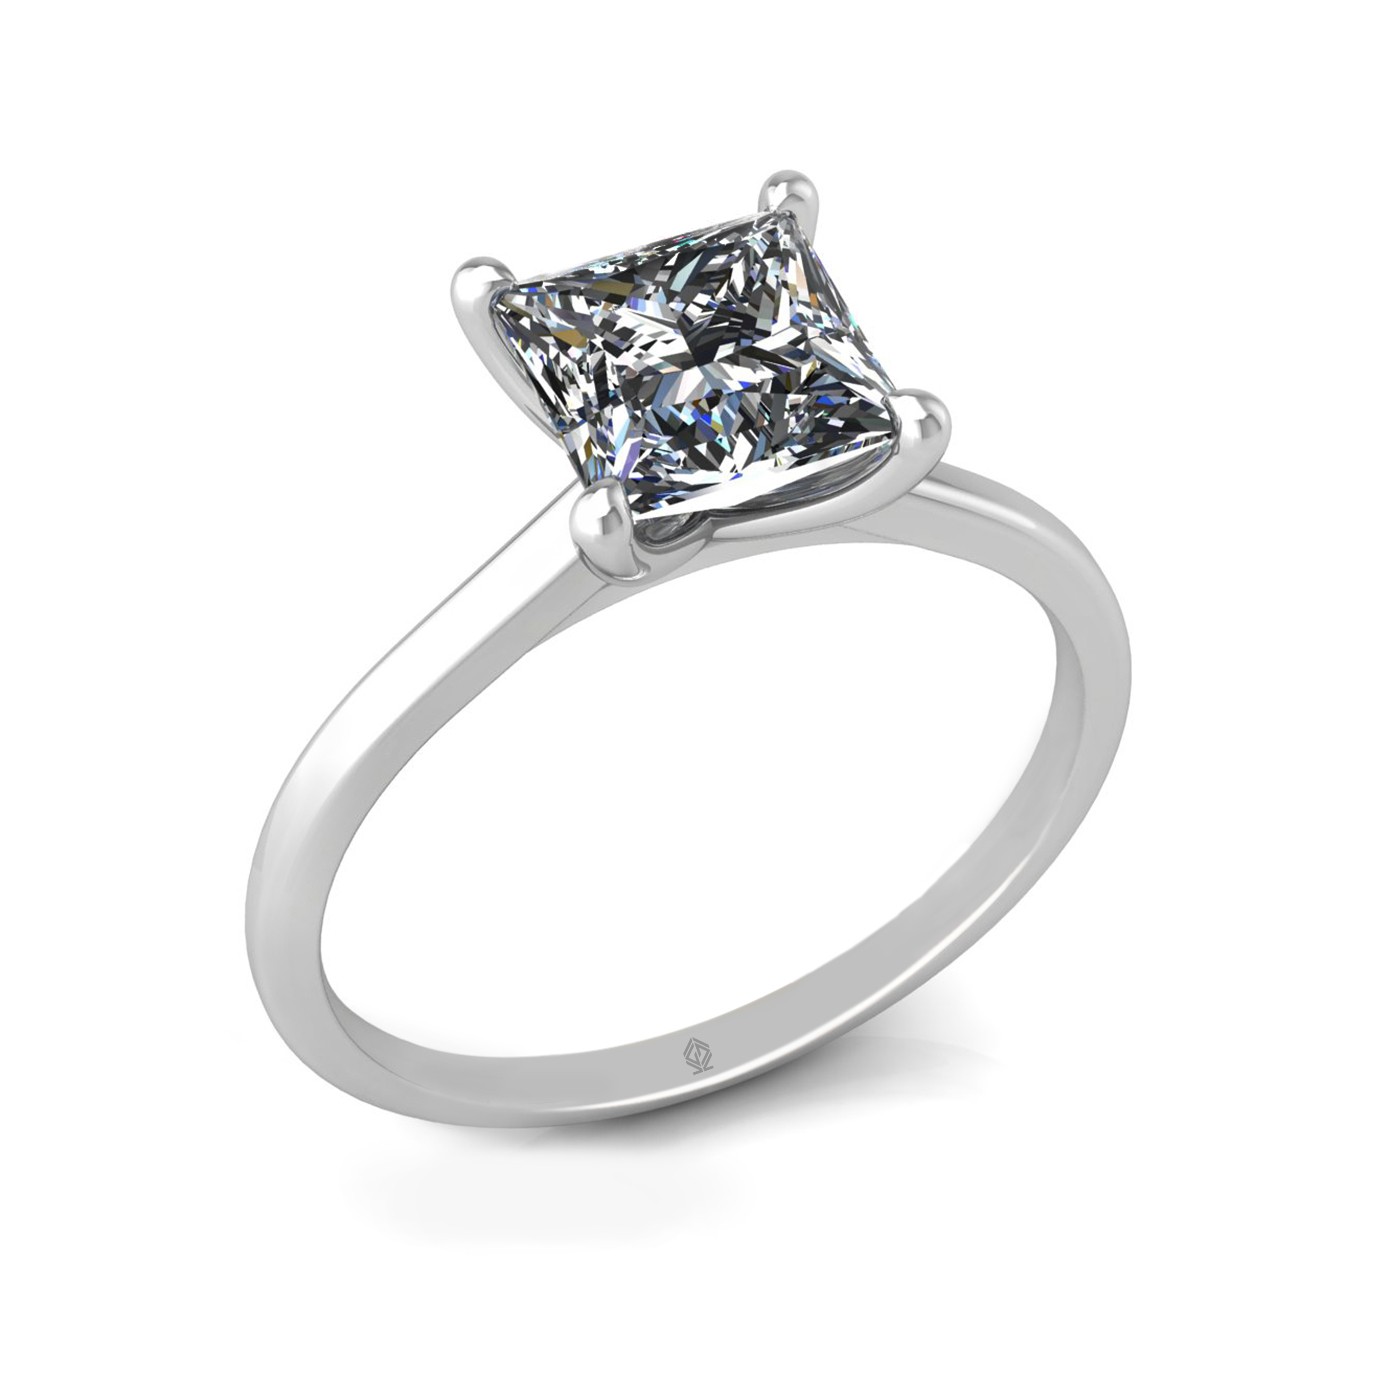 18k white gold  1,50 ct 4 prongs solitaire princess cut diamond engagement ring with whisper thin band